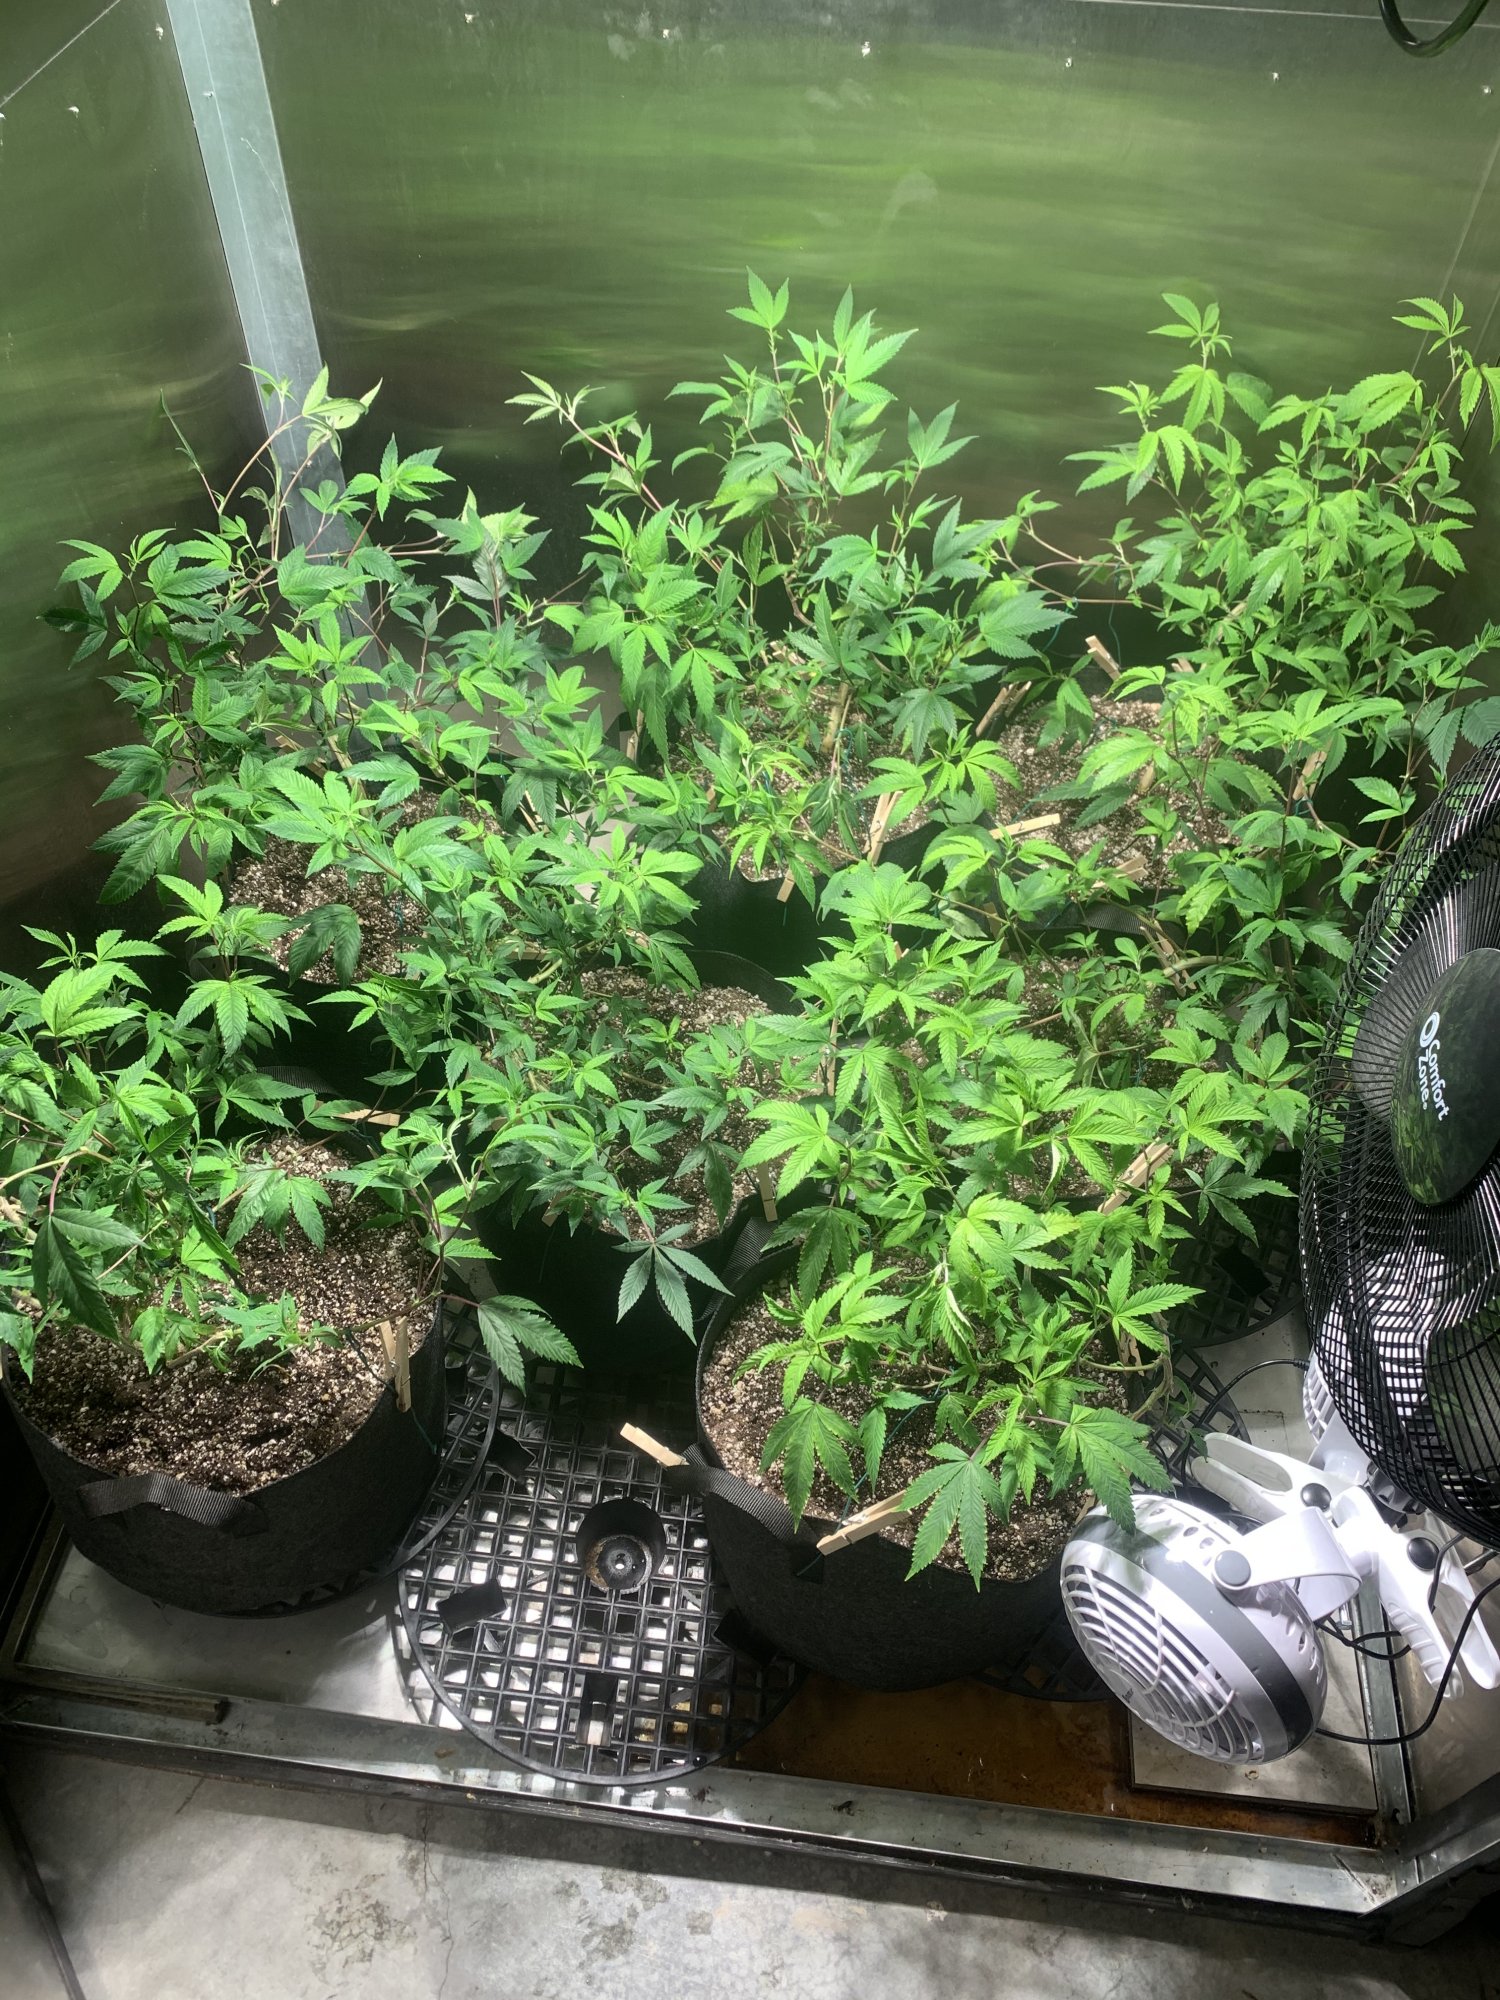 Second grow opinions on defoliation 2